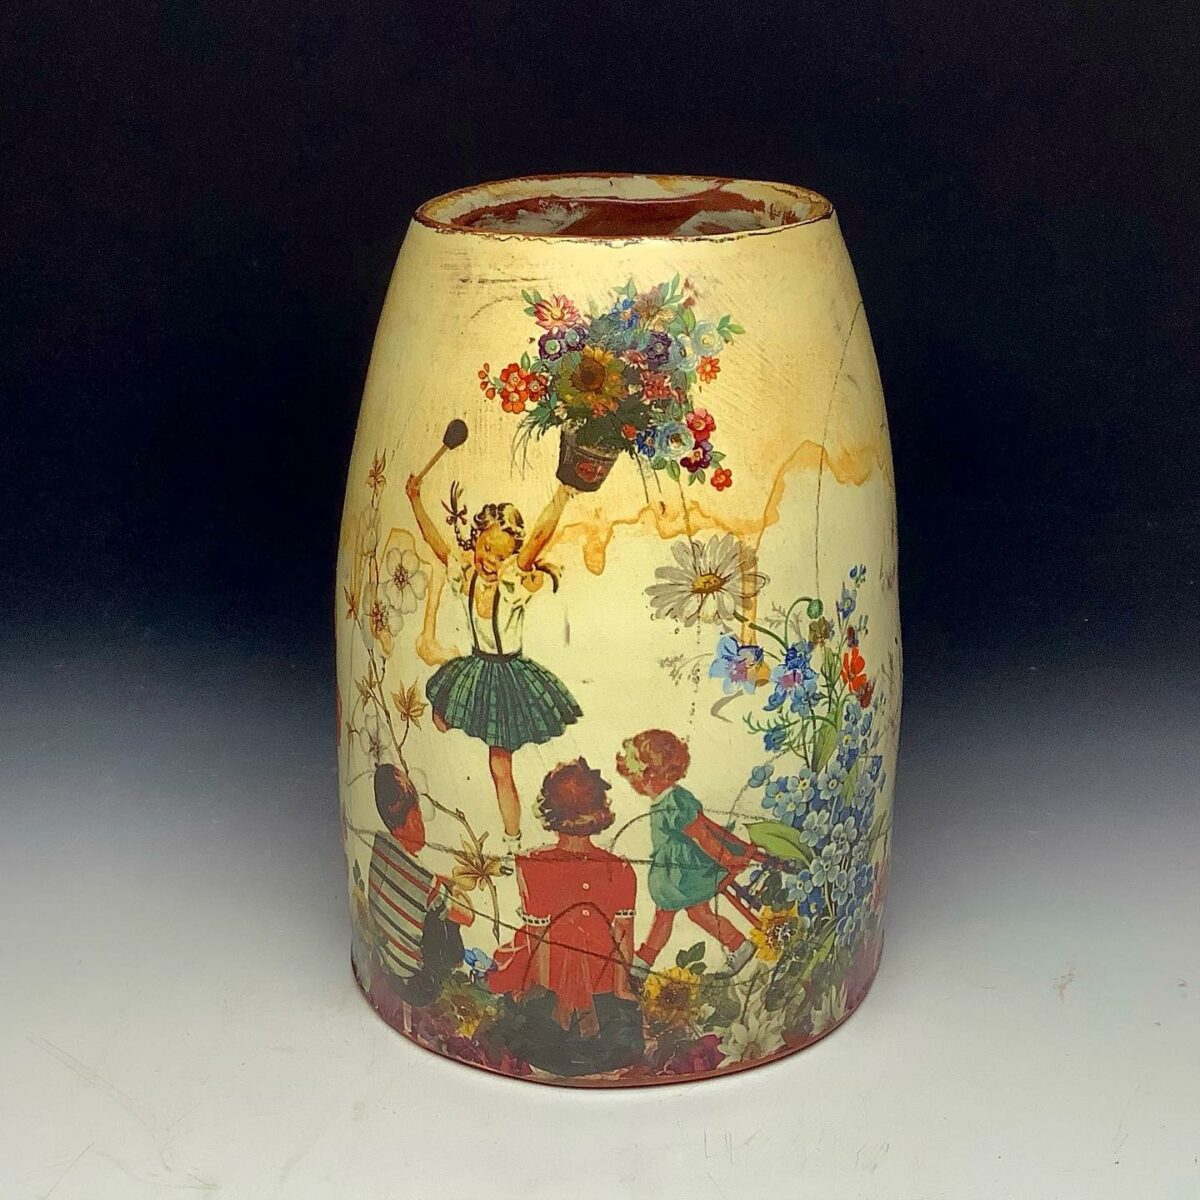 Gorgeous Earthenware Vessels Decorated With Vintage Imagery By Eric Pardue (2)